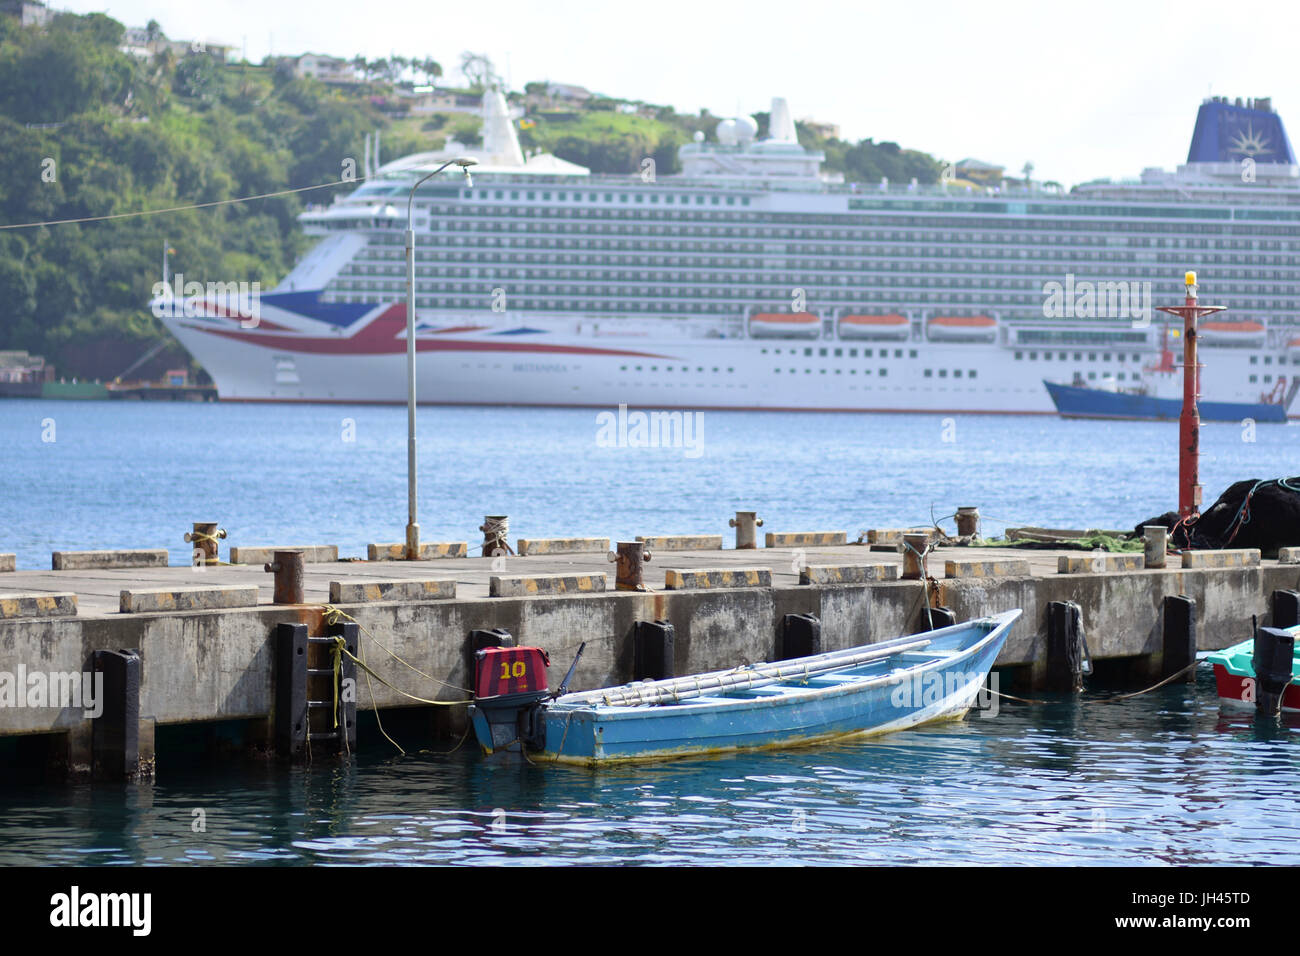 P&O Cruise Ship MV Britannia Docked in Kingstown, St. Vincent & The Grenadines in The Caribbean, with Small Local Boat in Foreground Stock Photo